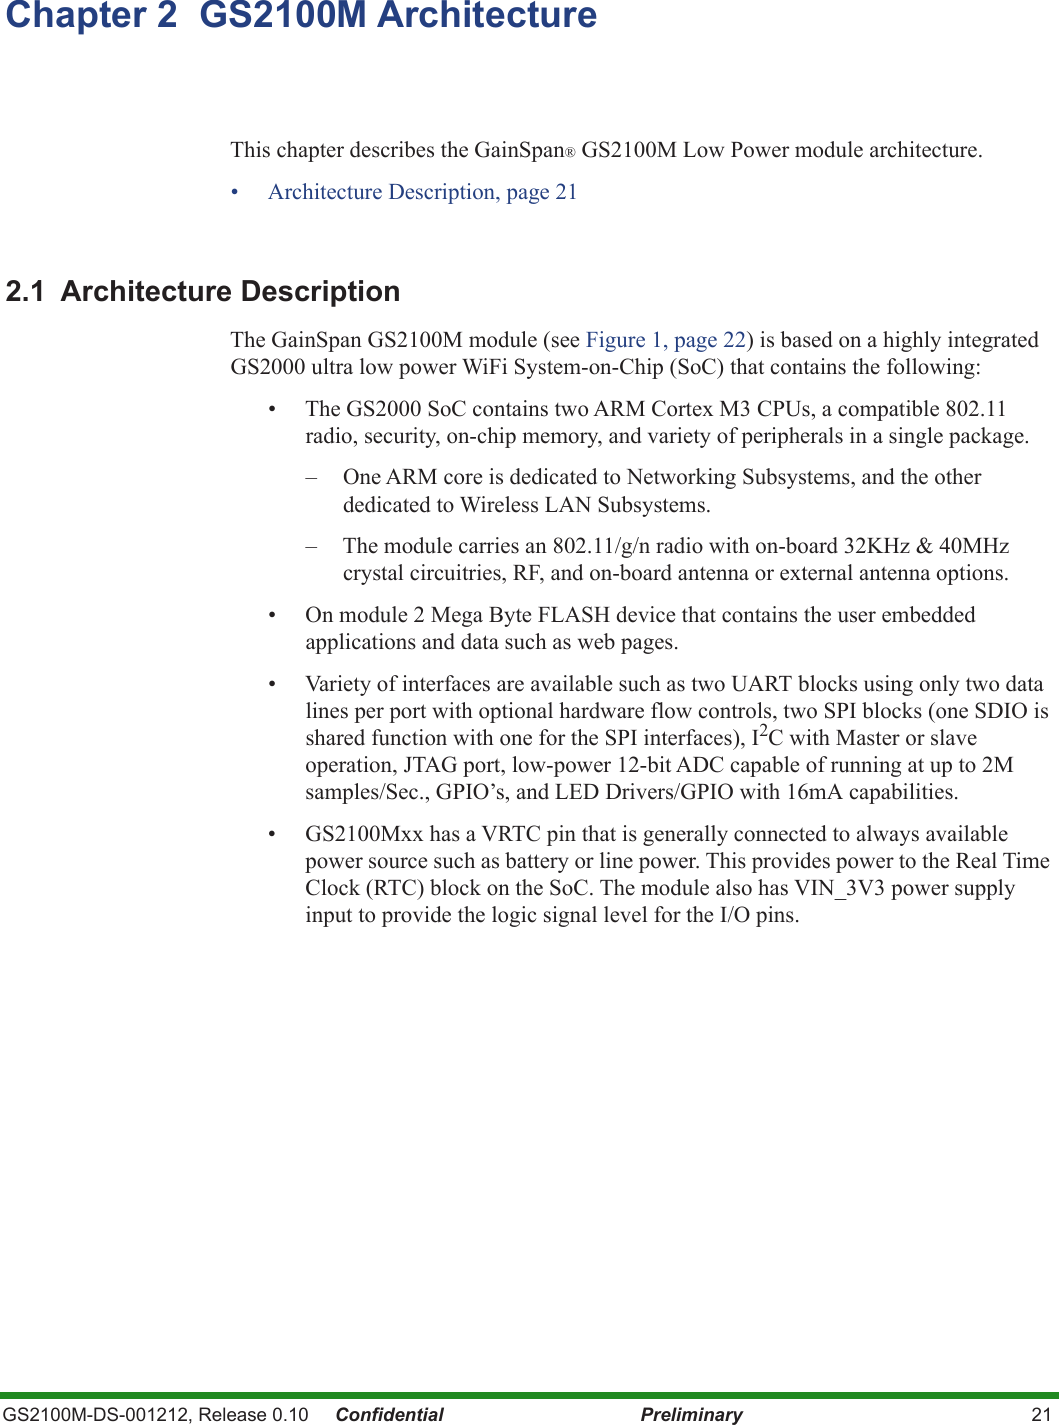 GS2100M-DS-001212, Release 0.10     Confidential Preliminary 21Chapter 2  GS2100M ArchitectureThis chapter describes the GainSpan® GS2100M Low Power module architecture. • Architecture Description, page 212.1 Architecture Description The GainSpan GS2100M module (see Figure 1, page 22) is based on a highly integrated GS2000 ultra low power WiFi System-on-Chip (SoC) that contains the following:• The GS2000 SoC contains two ARM Cortex M3 CPUs, a compatible 802.11 radio, security, on-chip memory, and variety of peripherals in a single package.   – One ARM core is dedicated to Networking Subsystems, and the other dedicated to Wireless LAN Subsystems.– The module carries an 802.11/g/n radio with on-board 32KHz &amp; 40MHz crystal circuitries, RF, and on-board antenna or external antenna options.• On module 2 Mega Byte FLASH device that contains the user embedded applications and data such as web pages. • Variety of interfaces are available such as two UART blocks using only two data lines per port with optional hardware flow controls, two SPI blocks (one SDIO is shared function with one for the SPI interfaces), I2C with Master or slave operation, JTAG port, low-power 12-bit ADC capable of running at up to 2M samples/Sec., GPIO’s, and LED Drivers/GPIO with 16mA capabilities.• GS2100Mxx has a VRTC pin that is generally connected to always available power source such as battery or line power. This provides power to the Real Time Clock (RTC) block on the SoC. The module also has VIN_3V3 power supply input to provide the logic signal level for the I/O pins. 